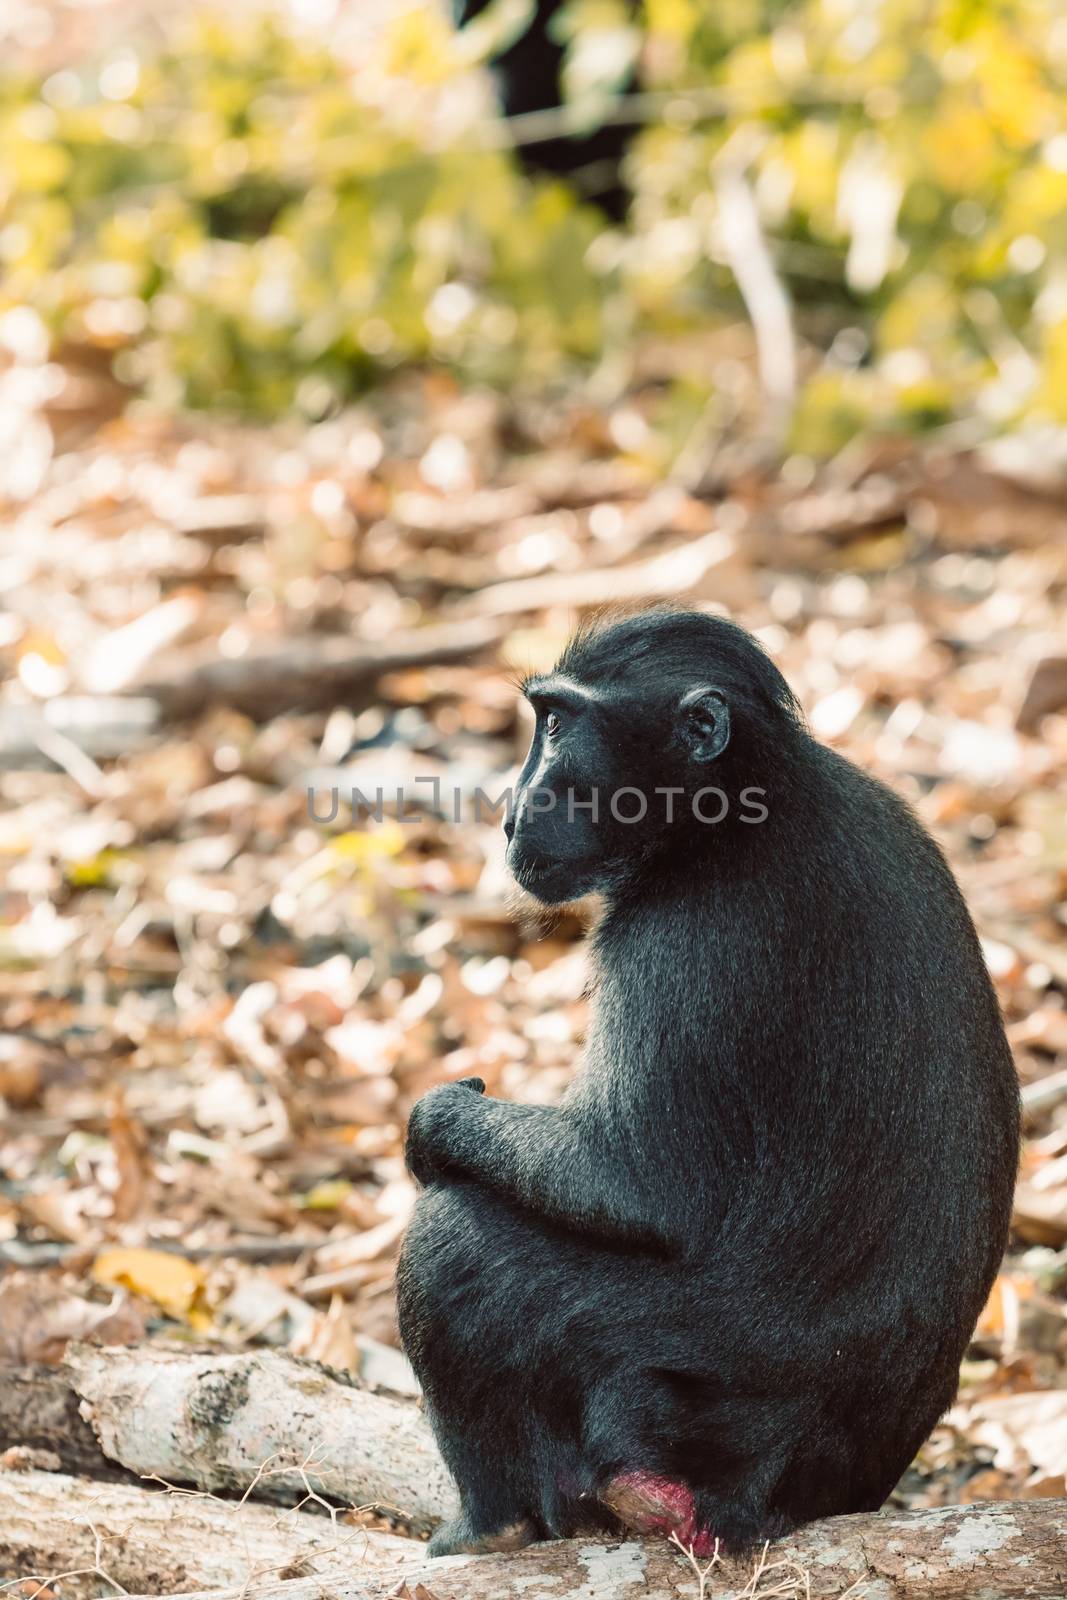 Celebes crested macaque, Sulawesi, Indonesia wildlife by artush